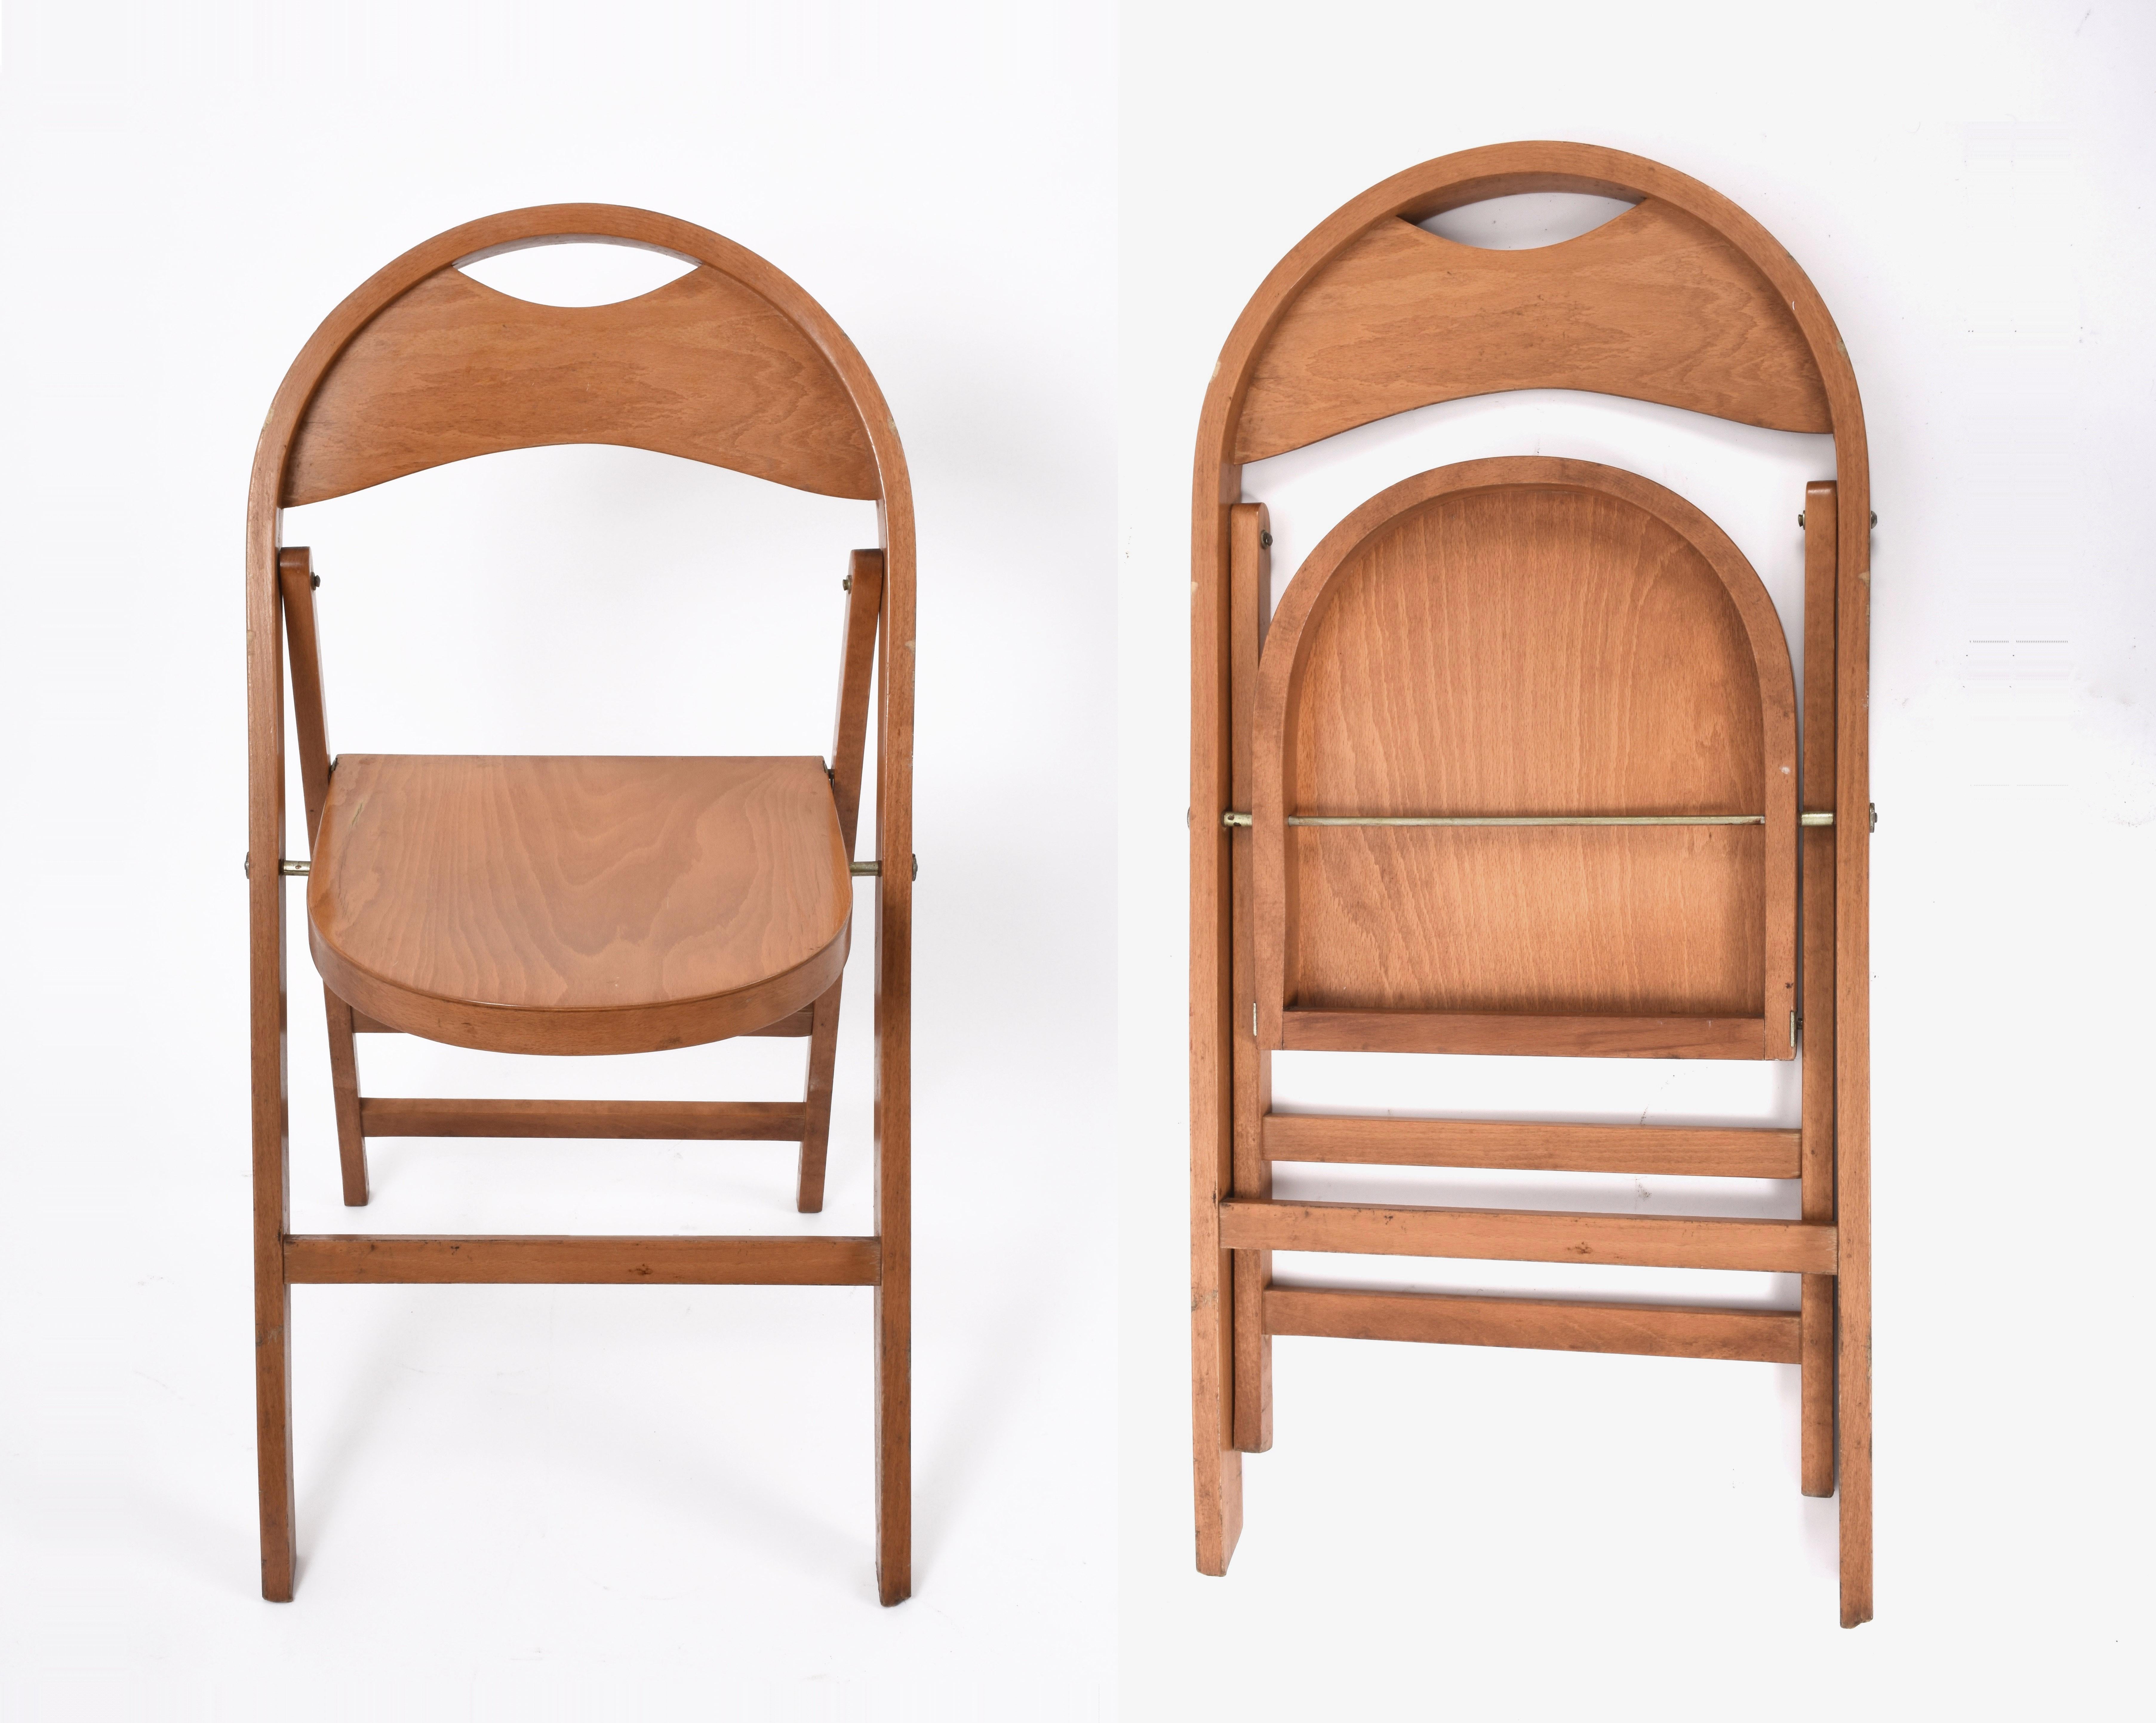 Four solid wood folding chairs.

The design is inspired by the round shapes of the 1930s. Its creation was made possible thanks to the collaboration of BBB in 1965, a company characterized by innovation and research. The chair is very practical